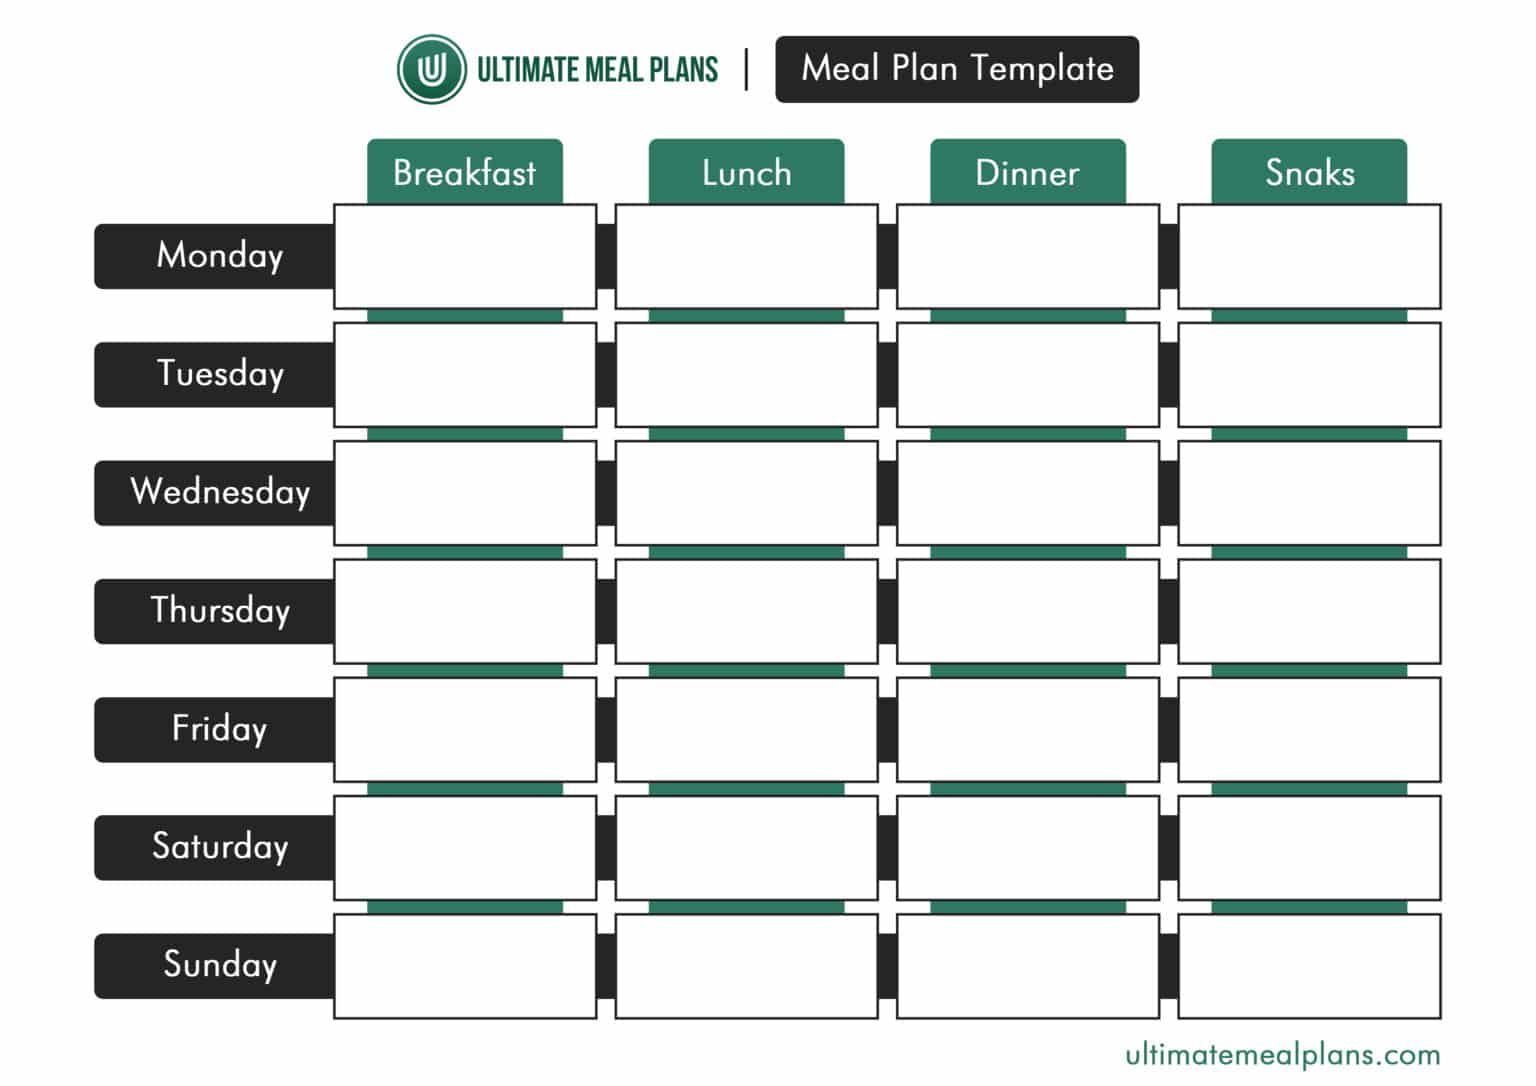 4 Free Templates for Meal Planning Ultimate Meal Plans